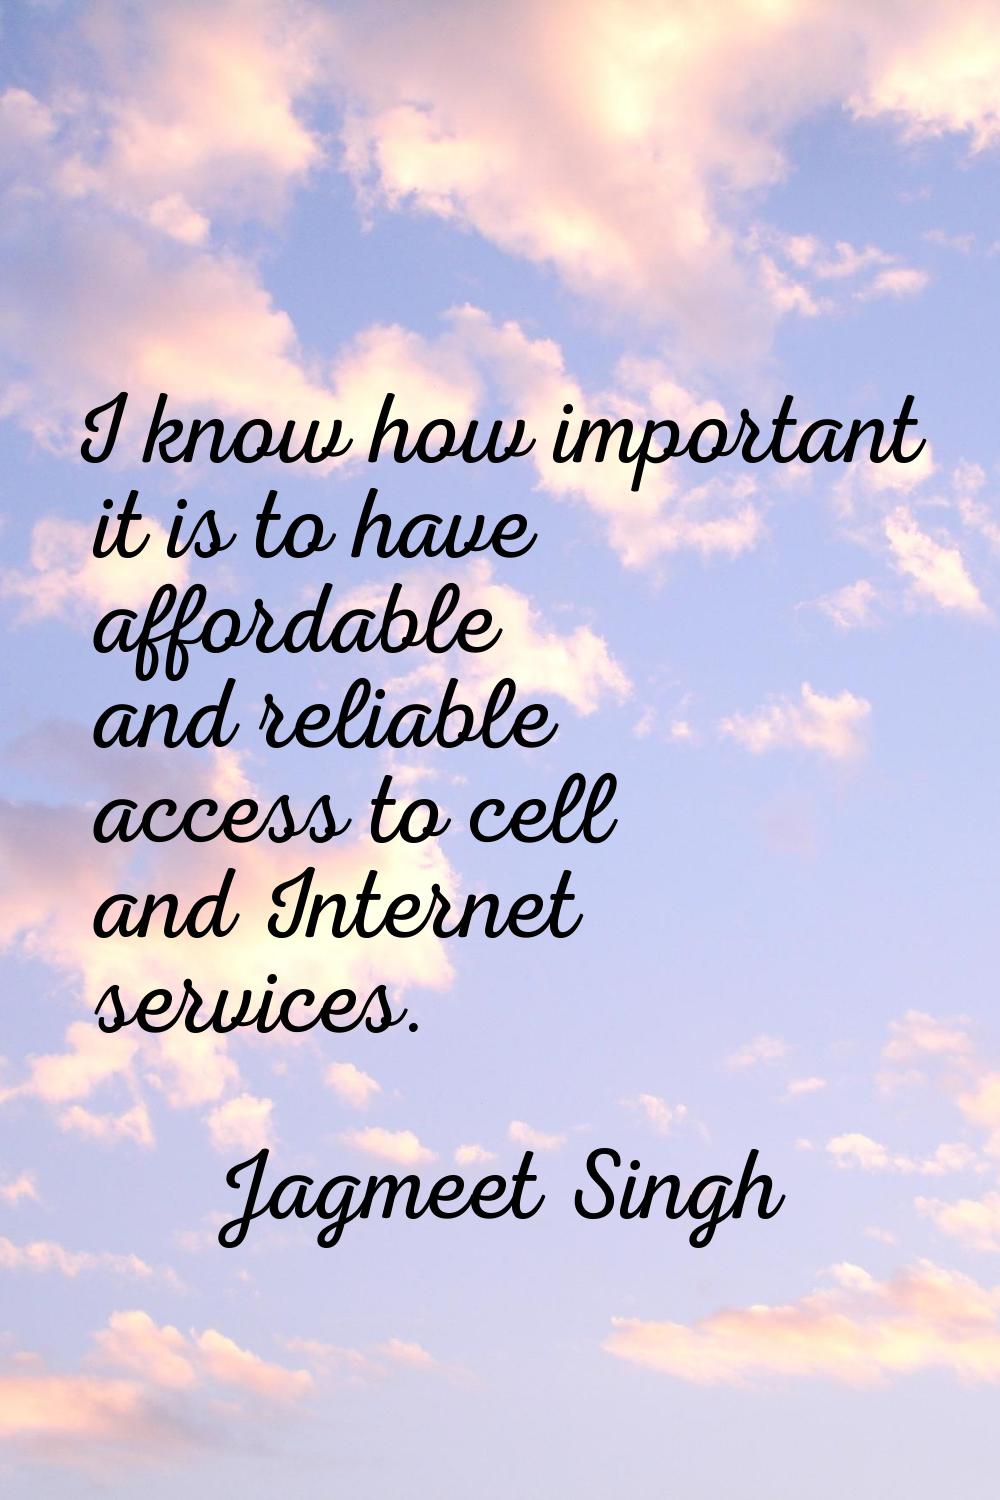 I know how important it is to have affordable and reliable access to cell and Internet services.